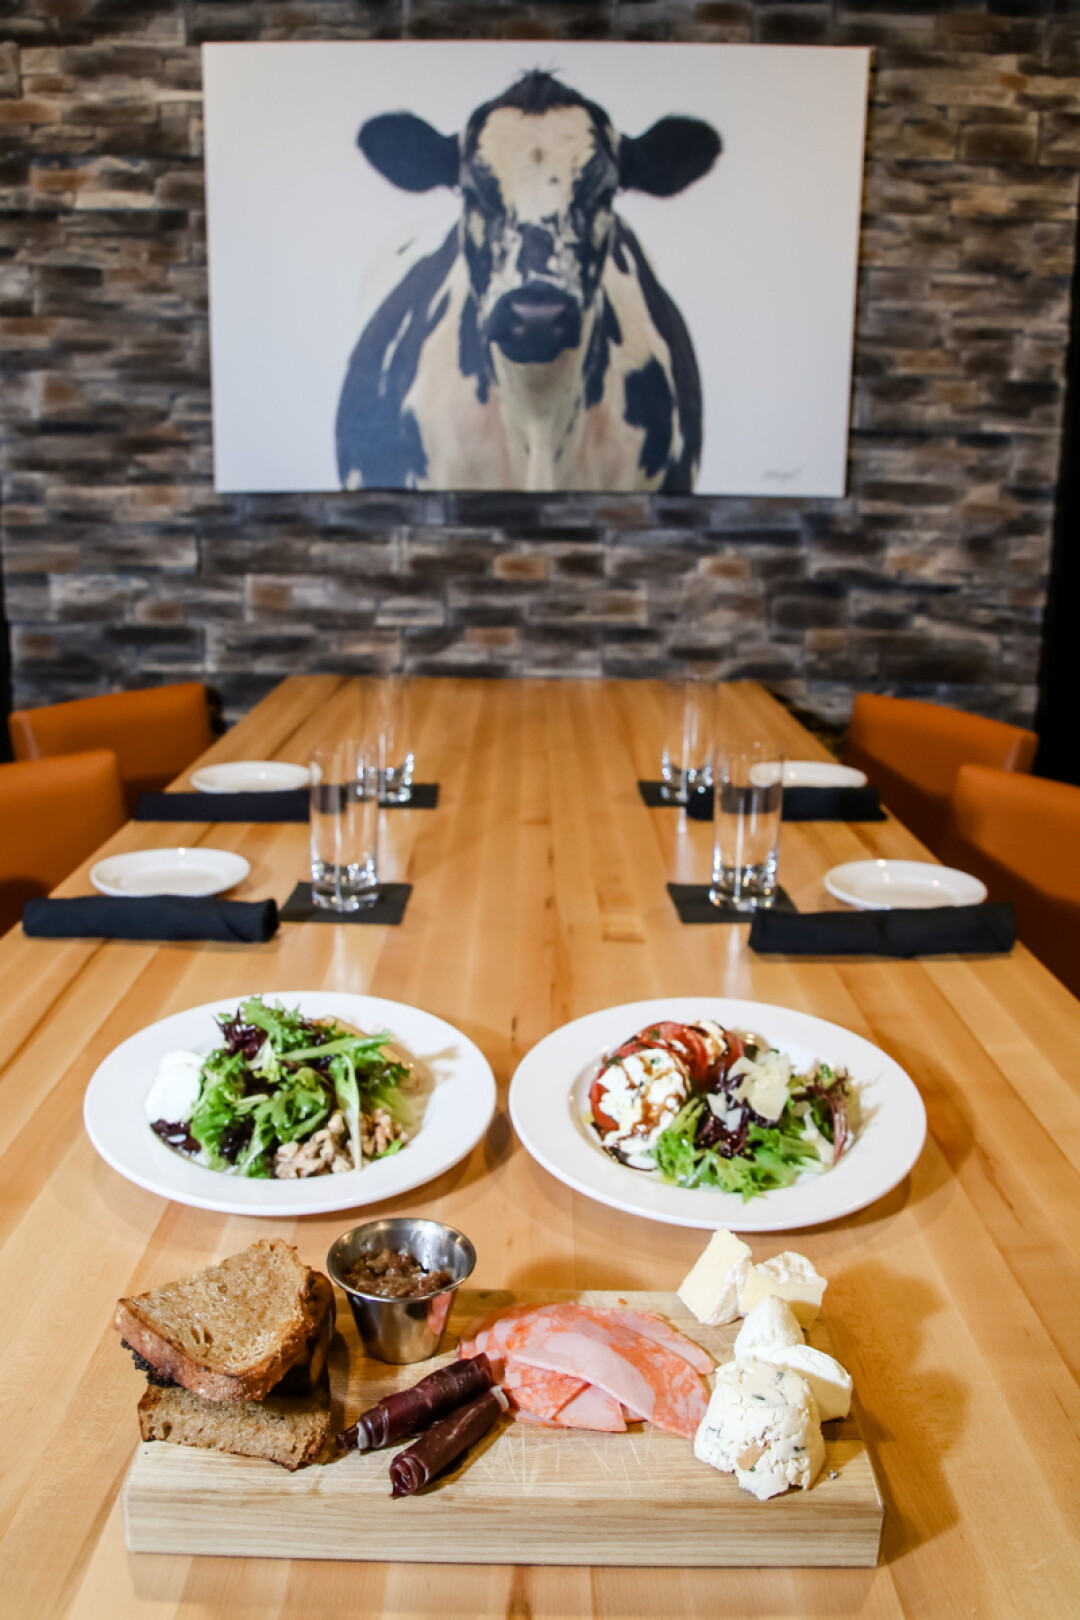 A MOOOOVING DINNER EXPERIENCE. The Wissota Chophouse – now open inside the new Cobblestone Hotel & Suites in downtown Chippewa Falls – is all about the meaty meal.